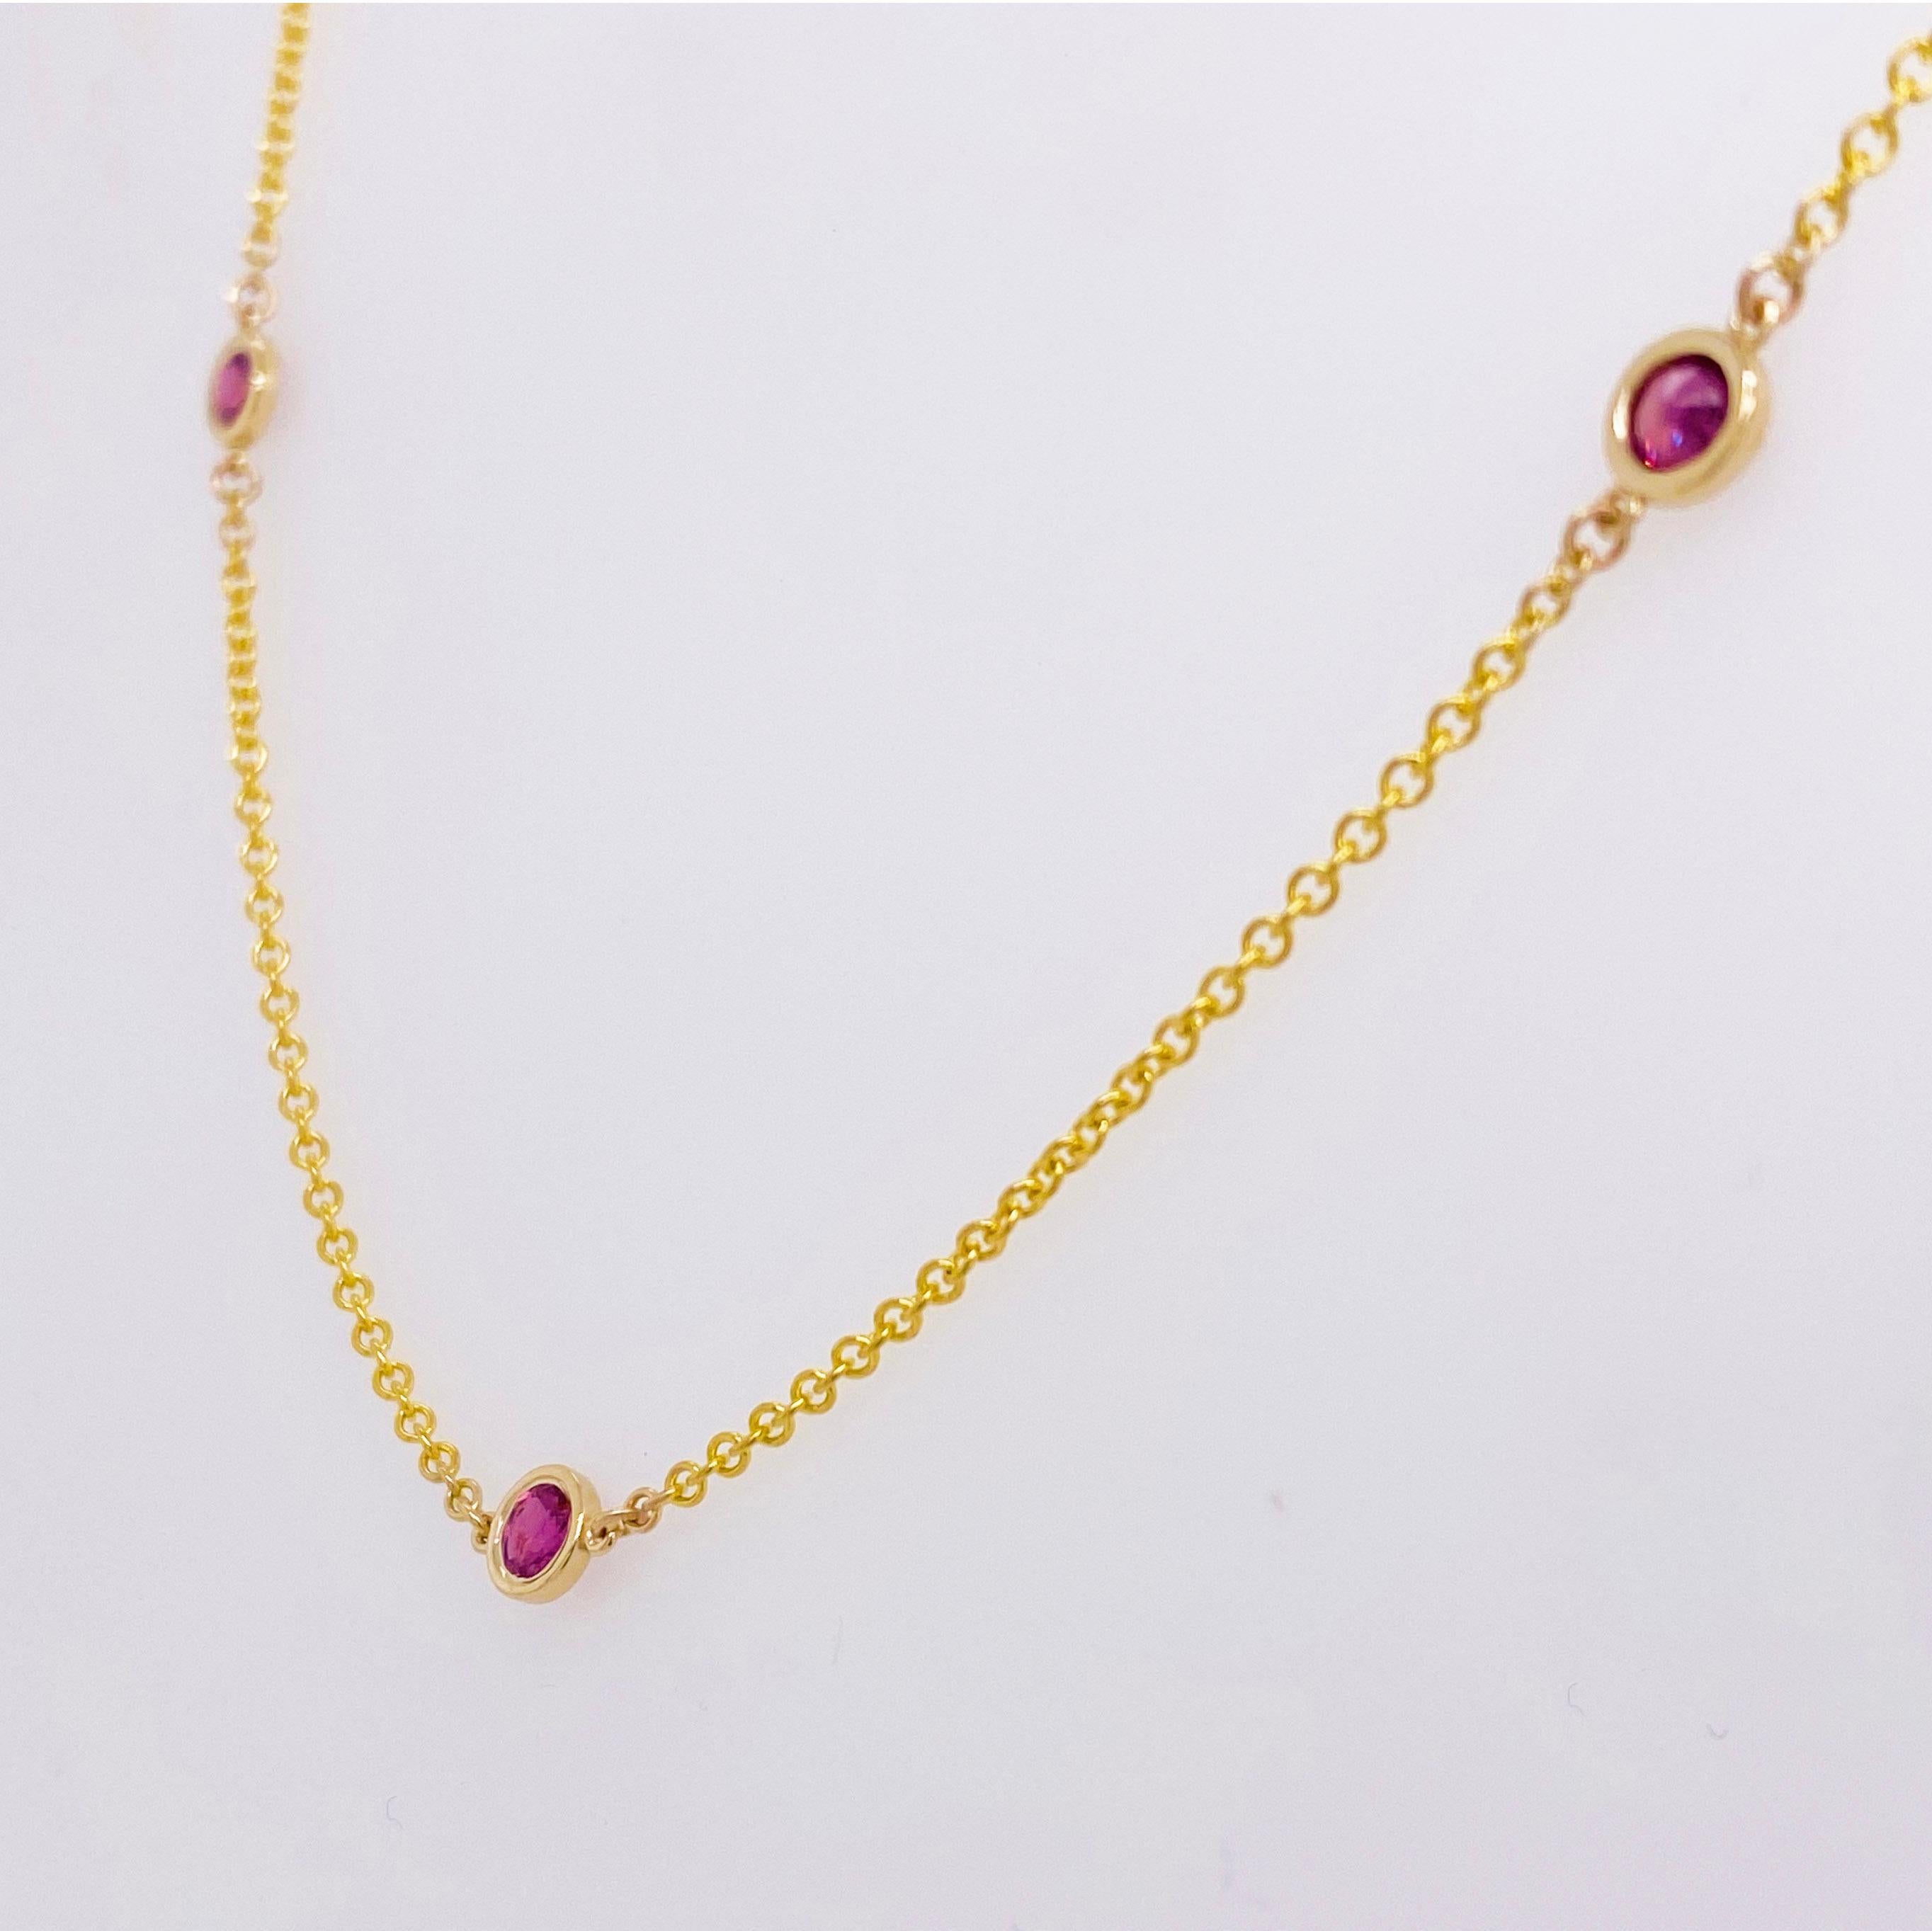 Round Cut Ruby Bezel Necklace, 14 Karat Gold, Rubies by the Yard Necklace, Ruby Chain